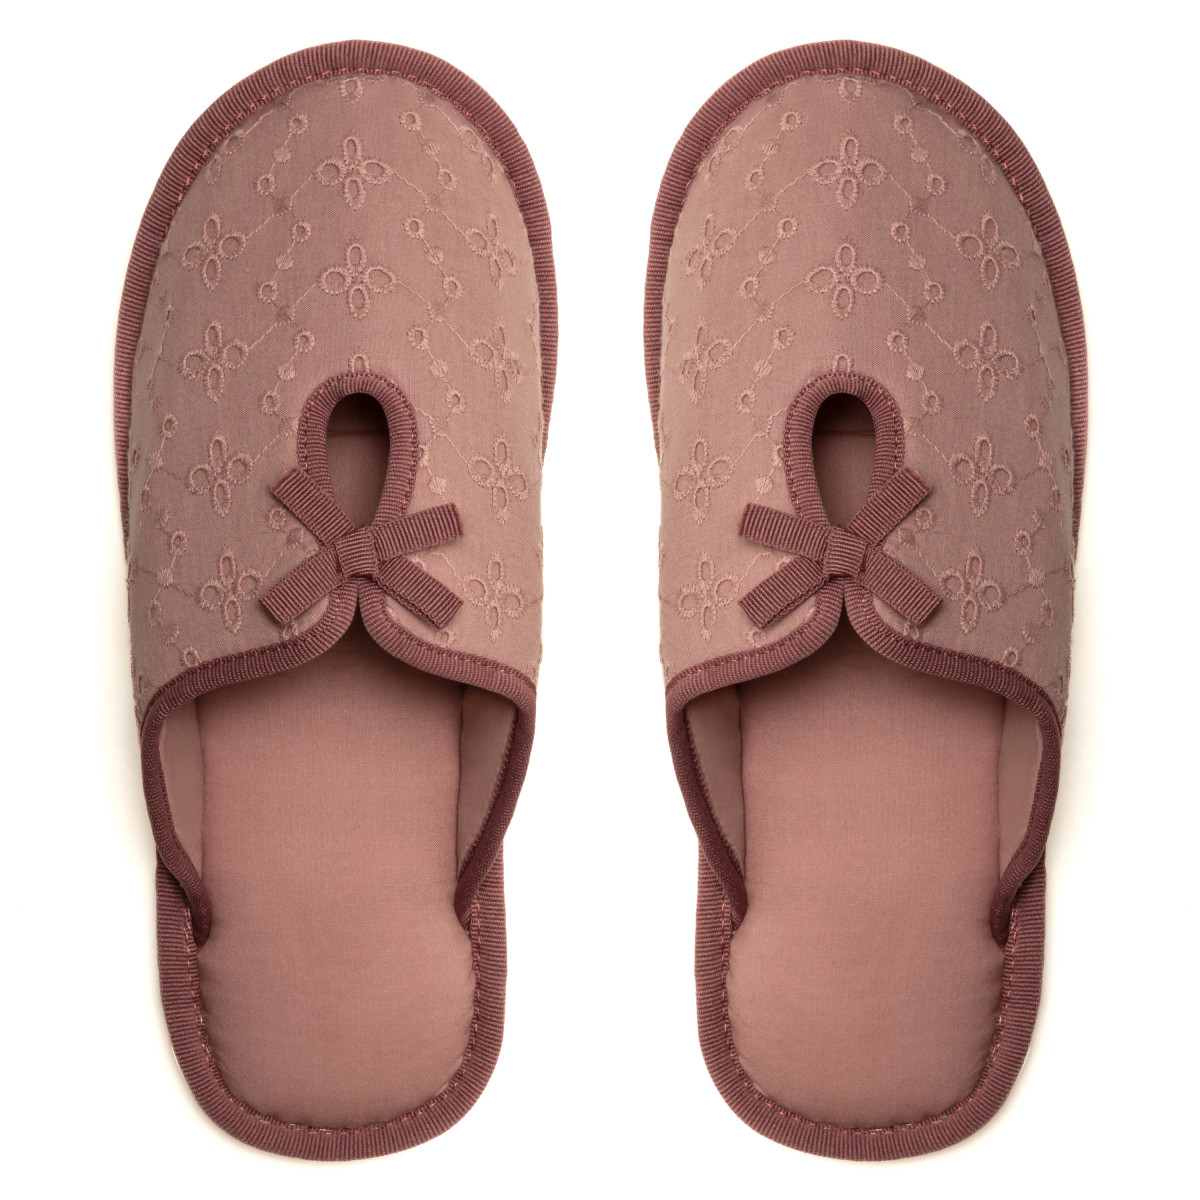 Home slippers BELLA, Pink